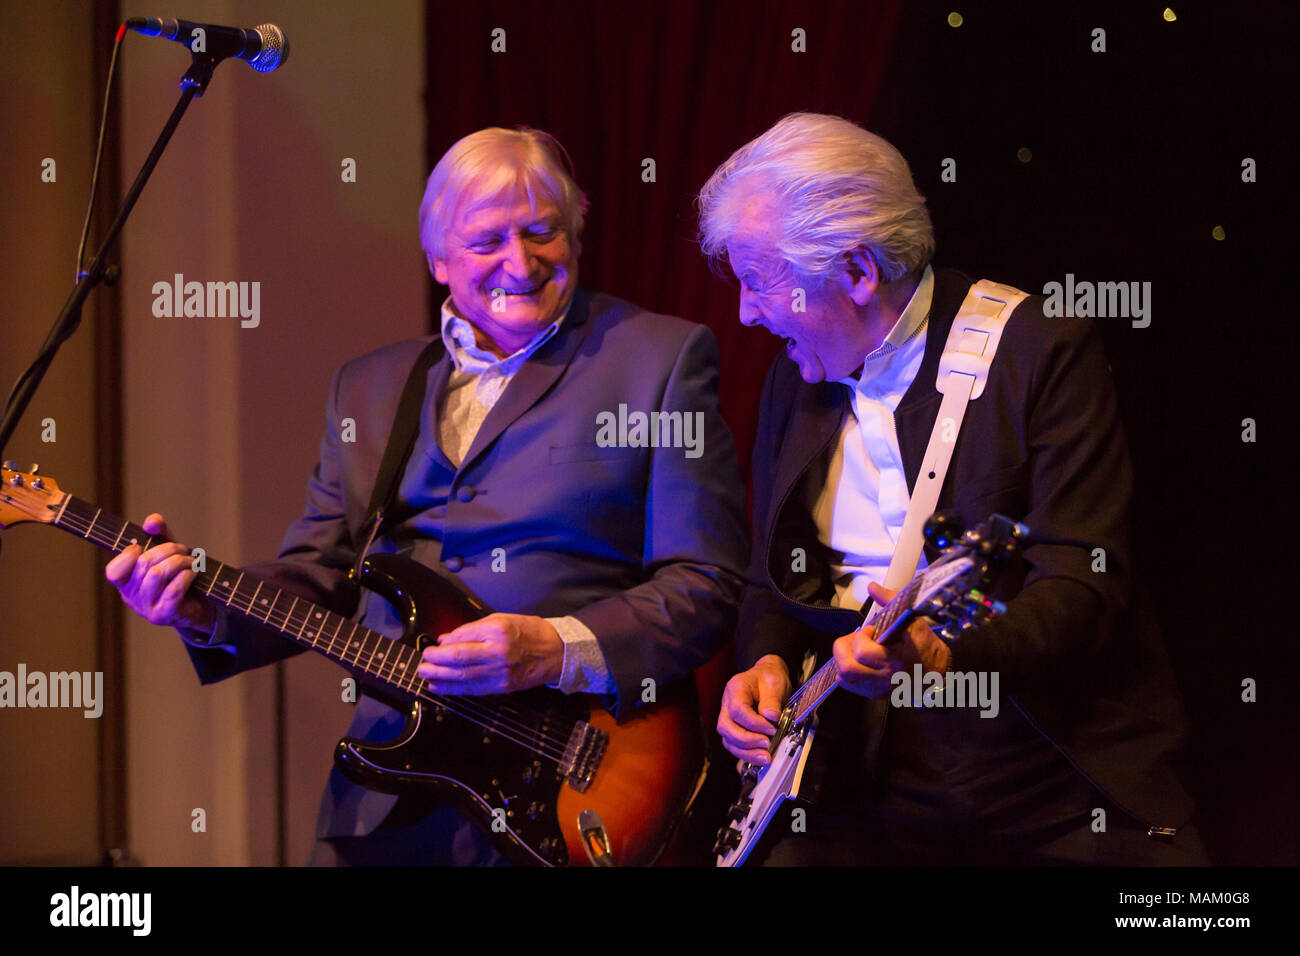 Nantwich, Cheshire, UK. 2nd April, 2018. Mike Pender from The Searchers rocks out with Eddie Wheeler of Vanity Fare at the Nantwich Civic Hall as part of the Oh Boy It's the non-stop Sixties show during the 22nd Nantwich Jazz, Blues and Music Festival. Credit: Simon Newbury/Alamy Live News Stock Photo